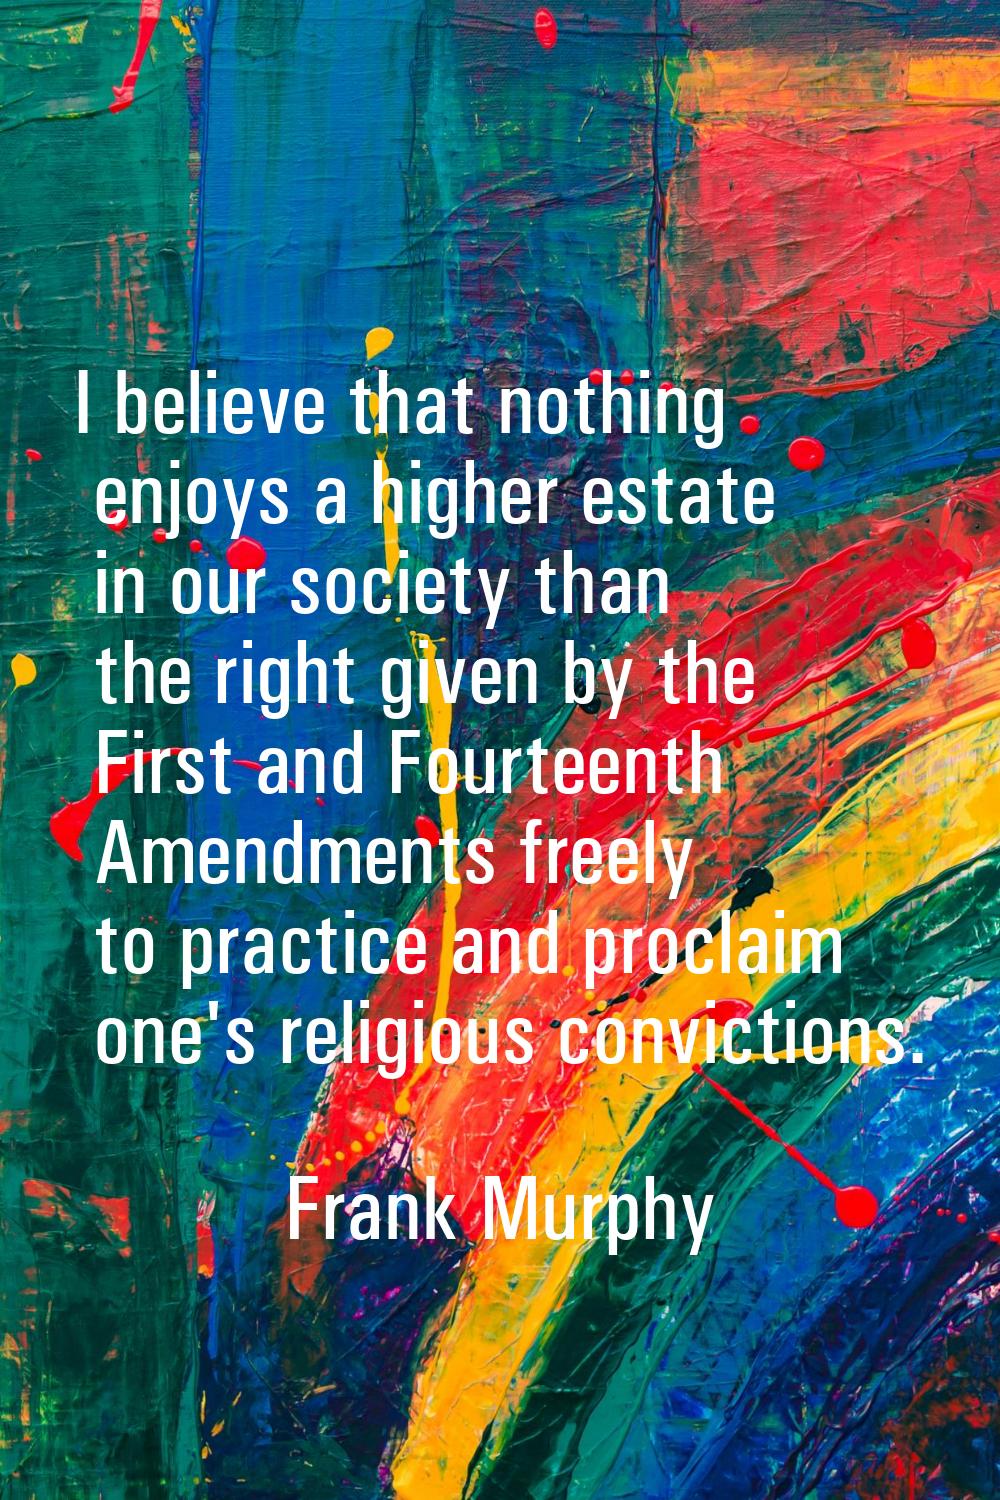 I believe that nothing enjoys a higher estate in our society than the right given by the First and 